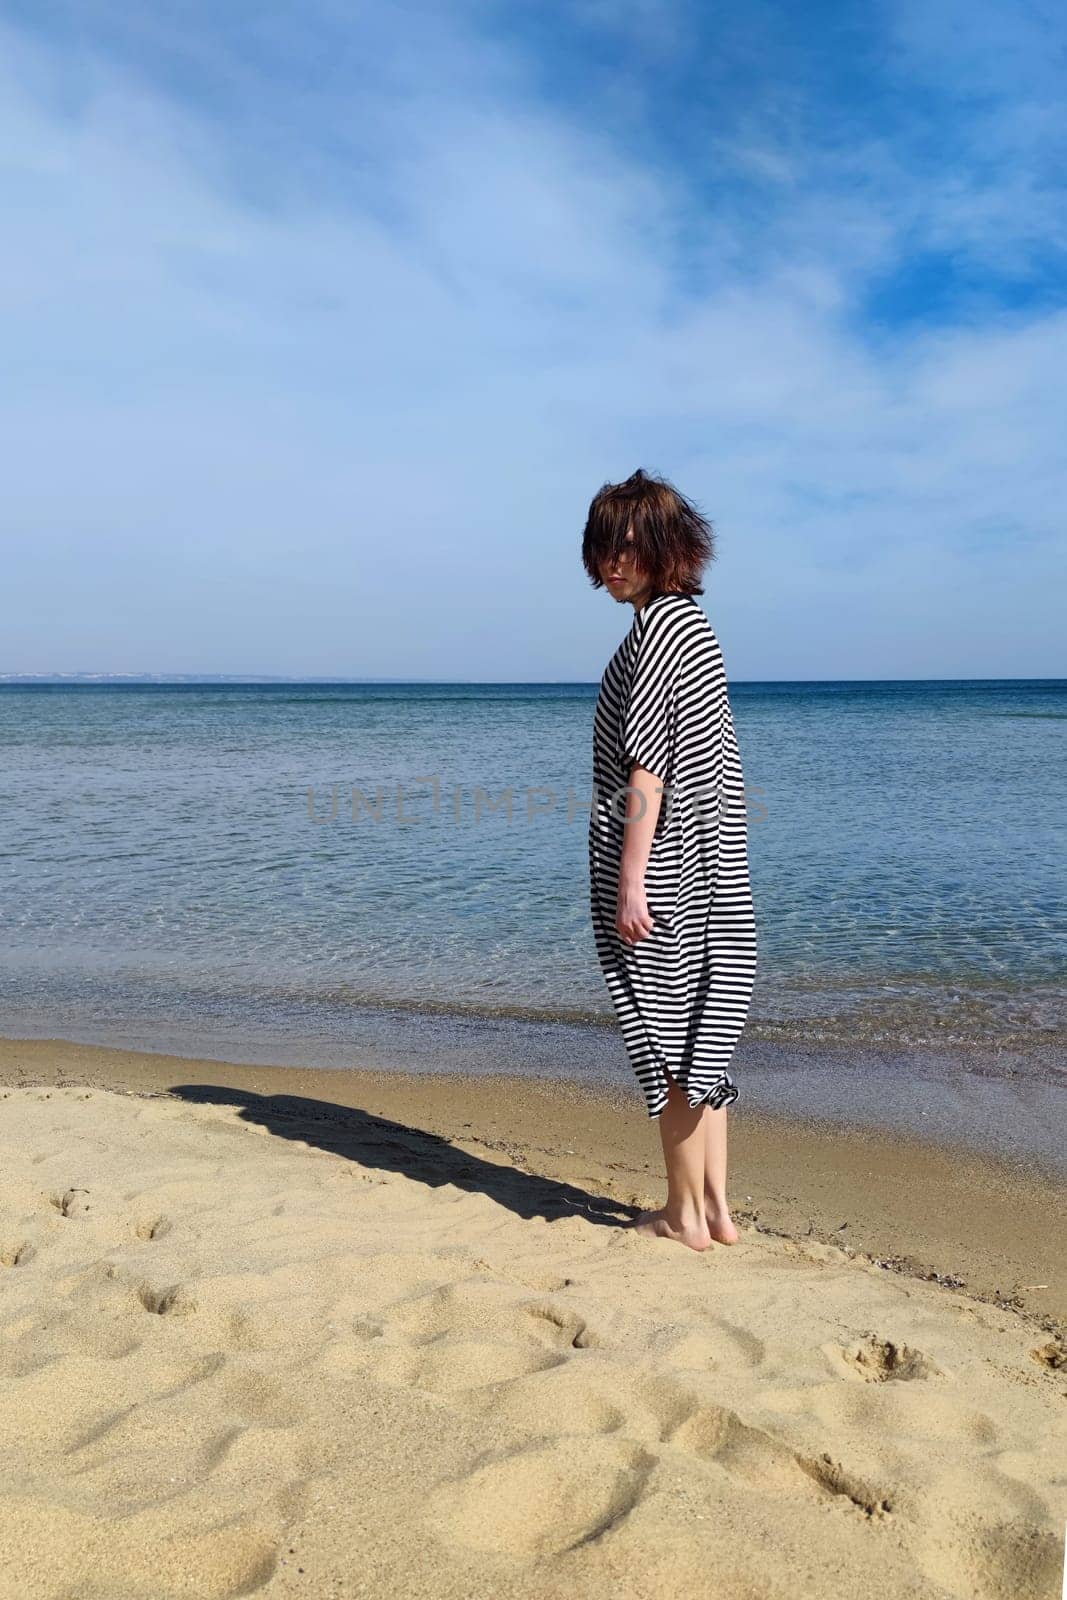 teenage girl with brown hair in a striped dress barefoot on the seashore on a sunny day